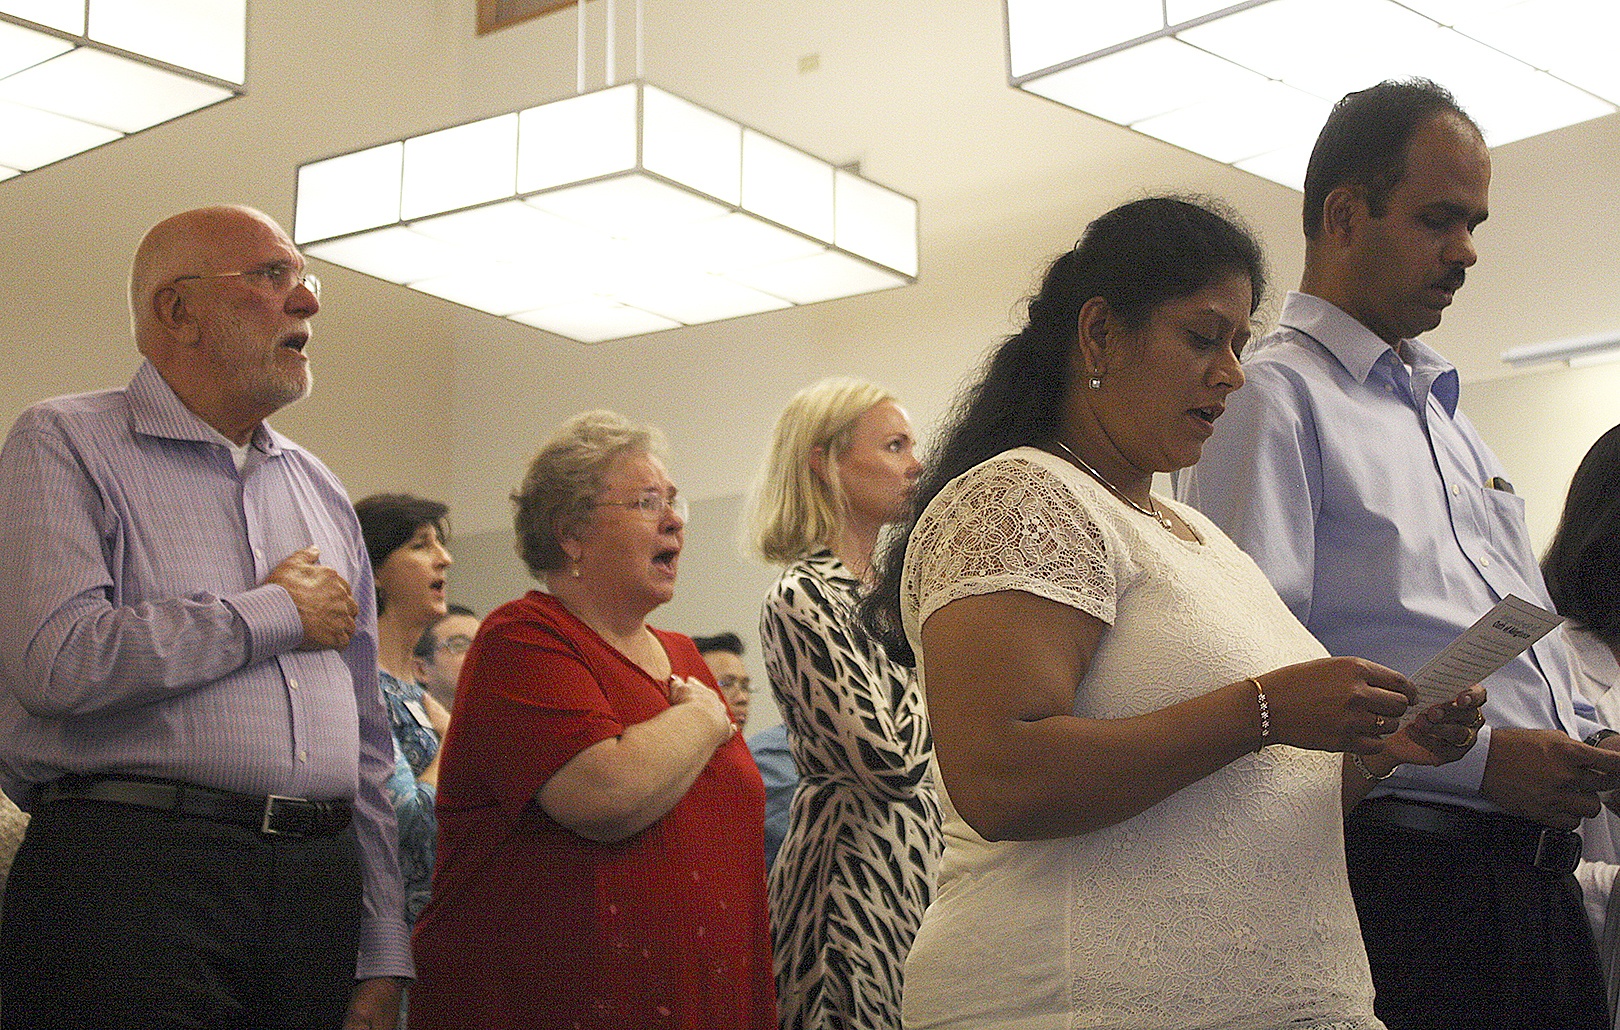 Allison DeAngelis/Staff PhotoSinging the national anthem at their naturalization ceremony